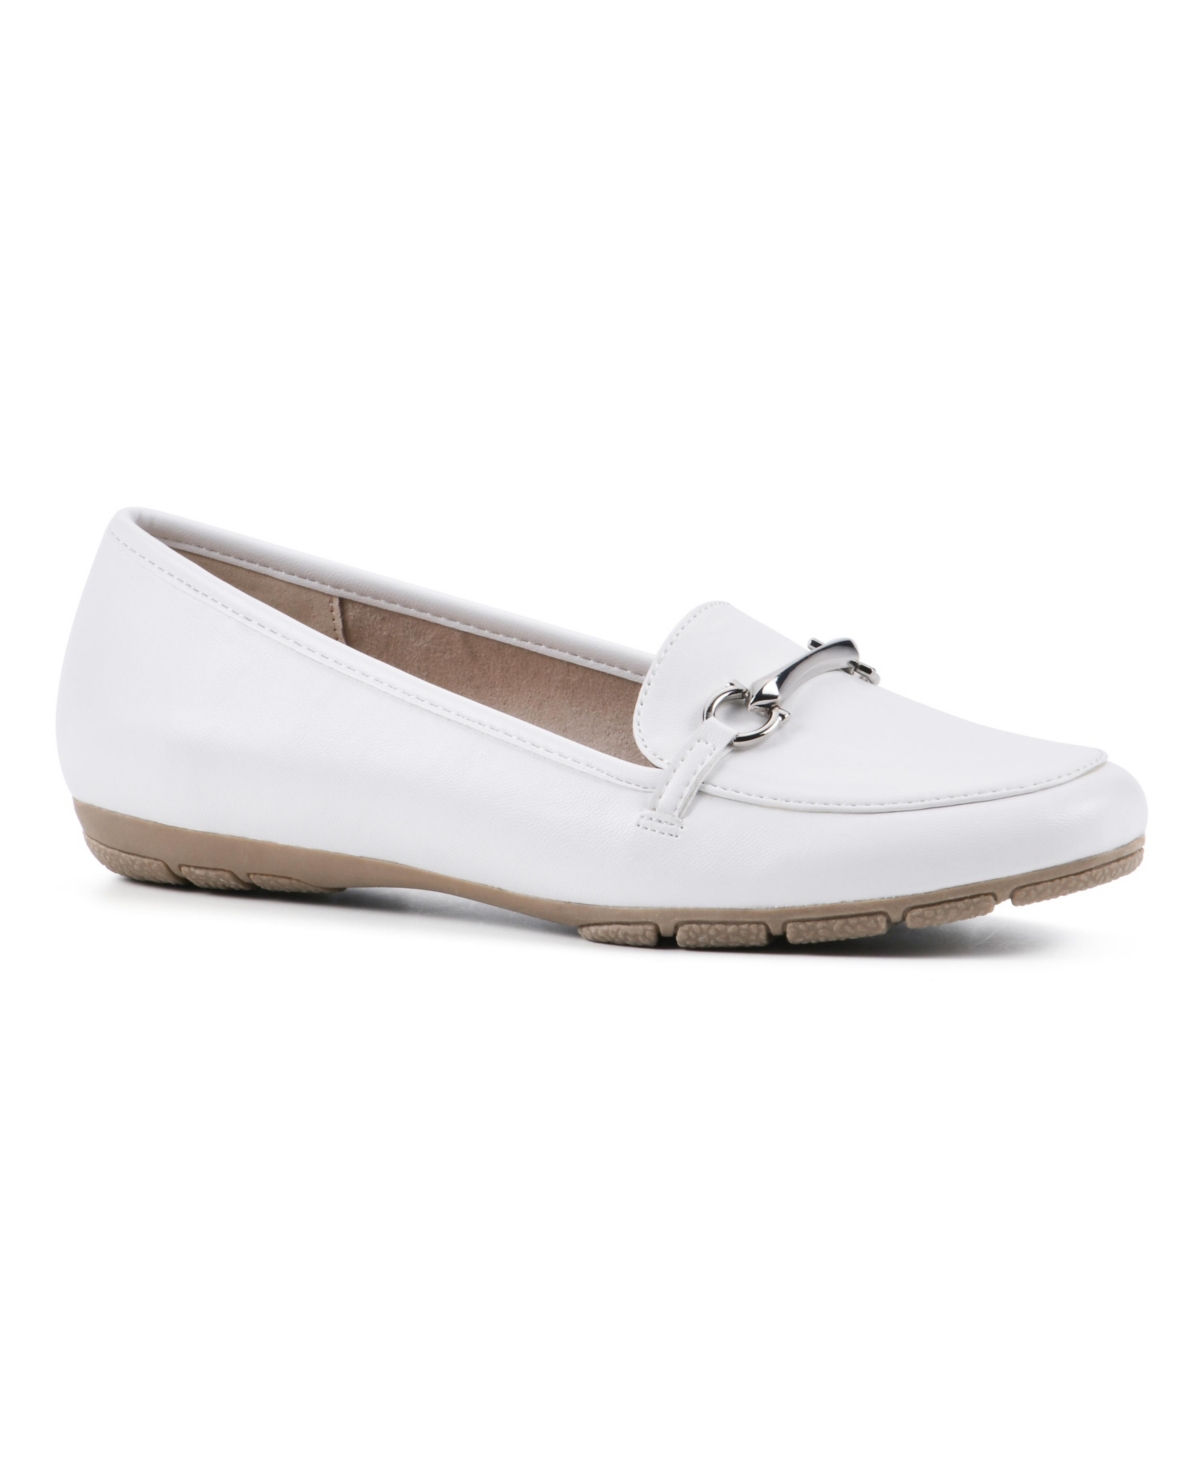 Women's Glowing Loafer Flats - White Smooth